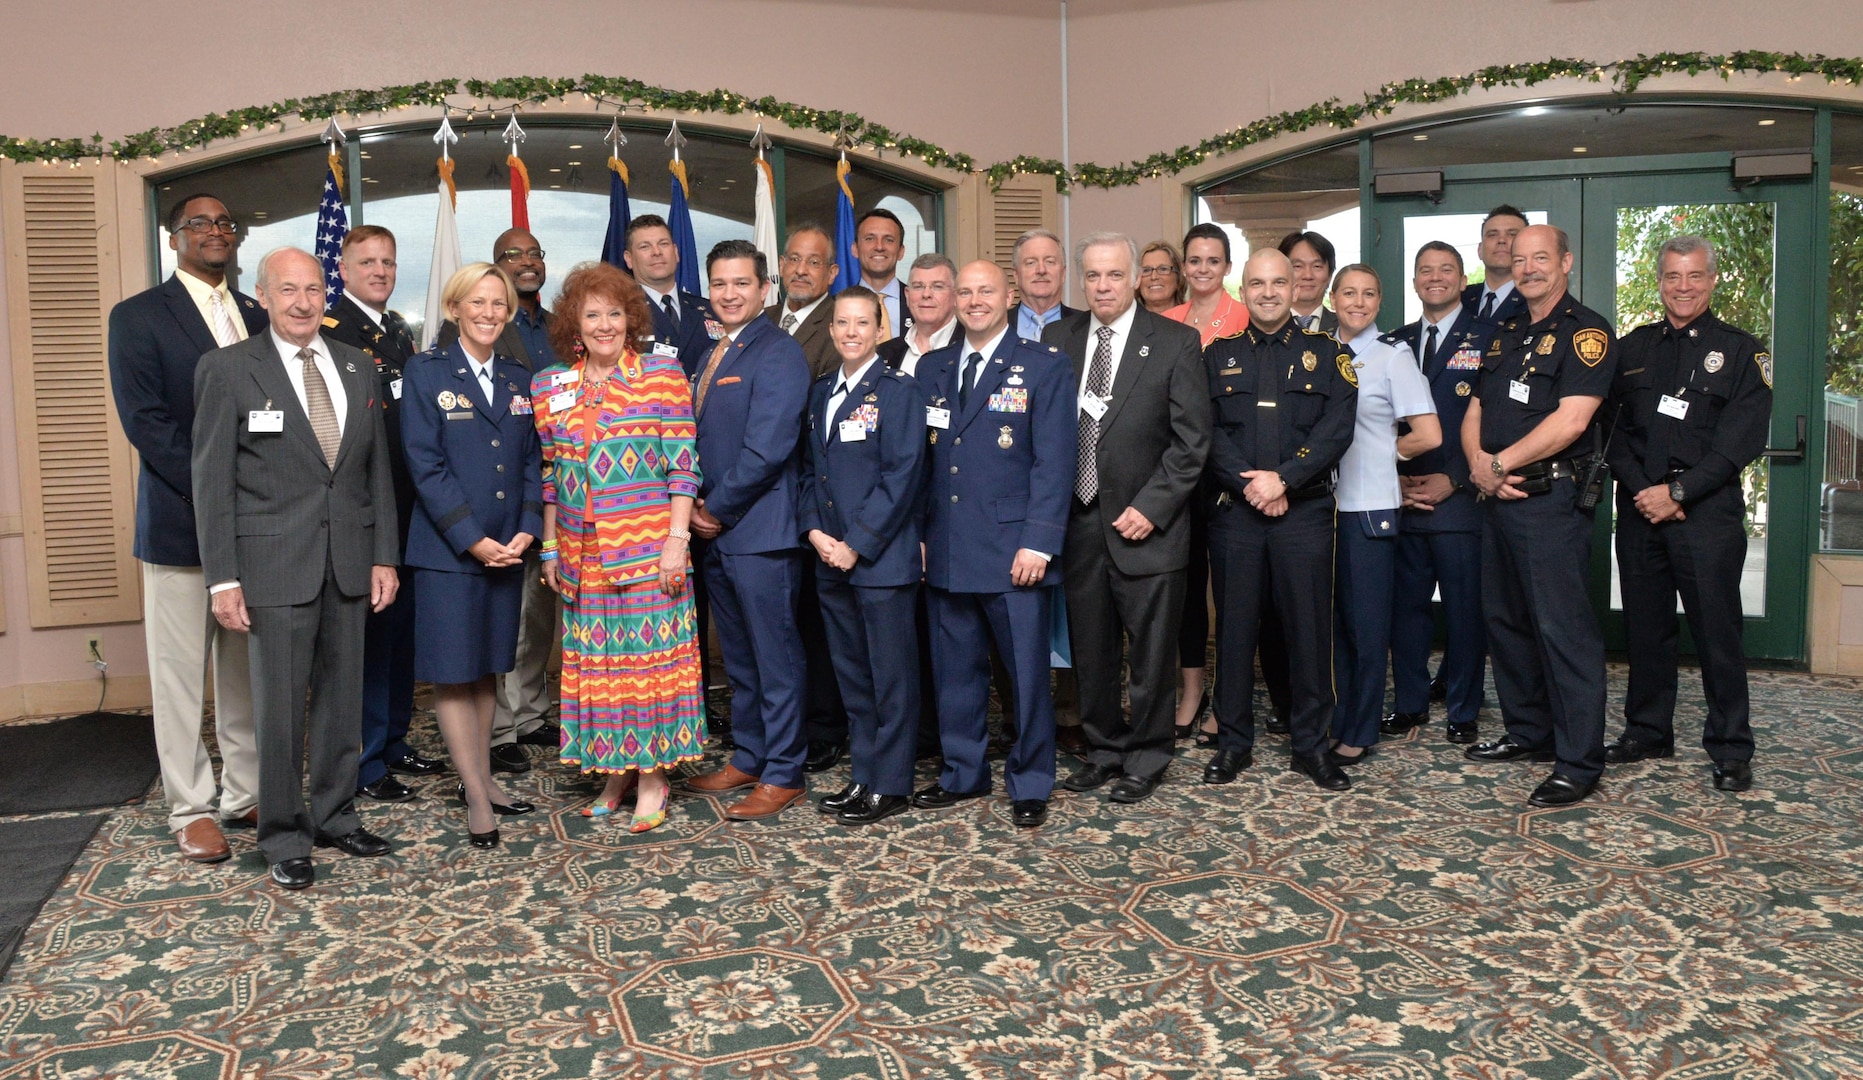 Members of the 2017-2019 502nd Air Base Wing Honorary Commanders’ Program gather following the organization’s official hail and farewell ceremony April 13 at the Fort Sam Houston Golf Course. The ceremony honored those civilian honorary commanders whose two-year tenure with the program had ended and welcomed the new honorary commanders replacing them. The Air Force program fosters strong community ties, and promotes understanding of Joint Base San Antonio by pairing civic leaders from the San Antonio metropolitan area with military commanders and senior leaders from the 502nd ABW. 